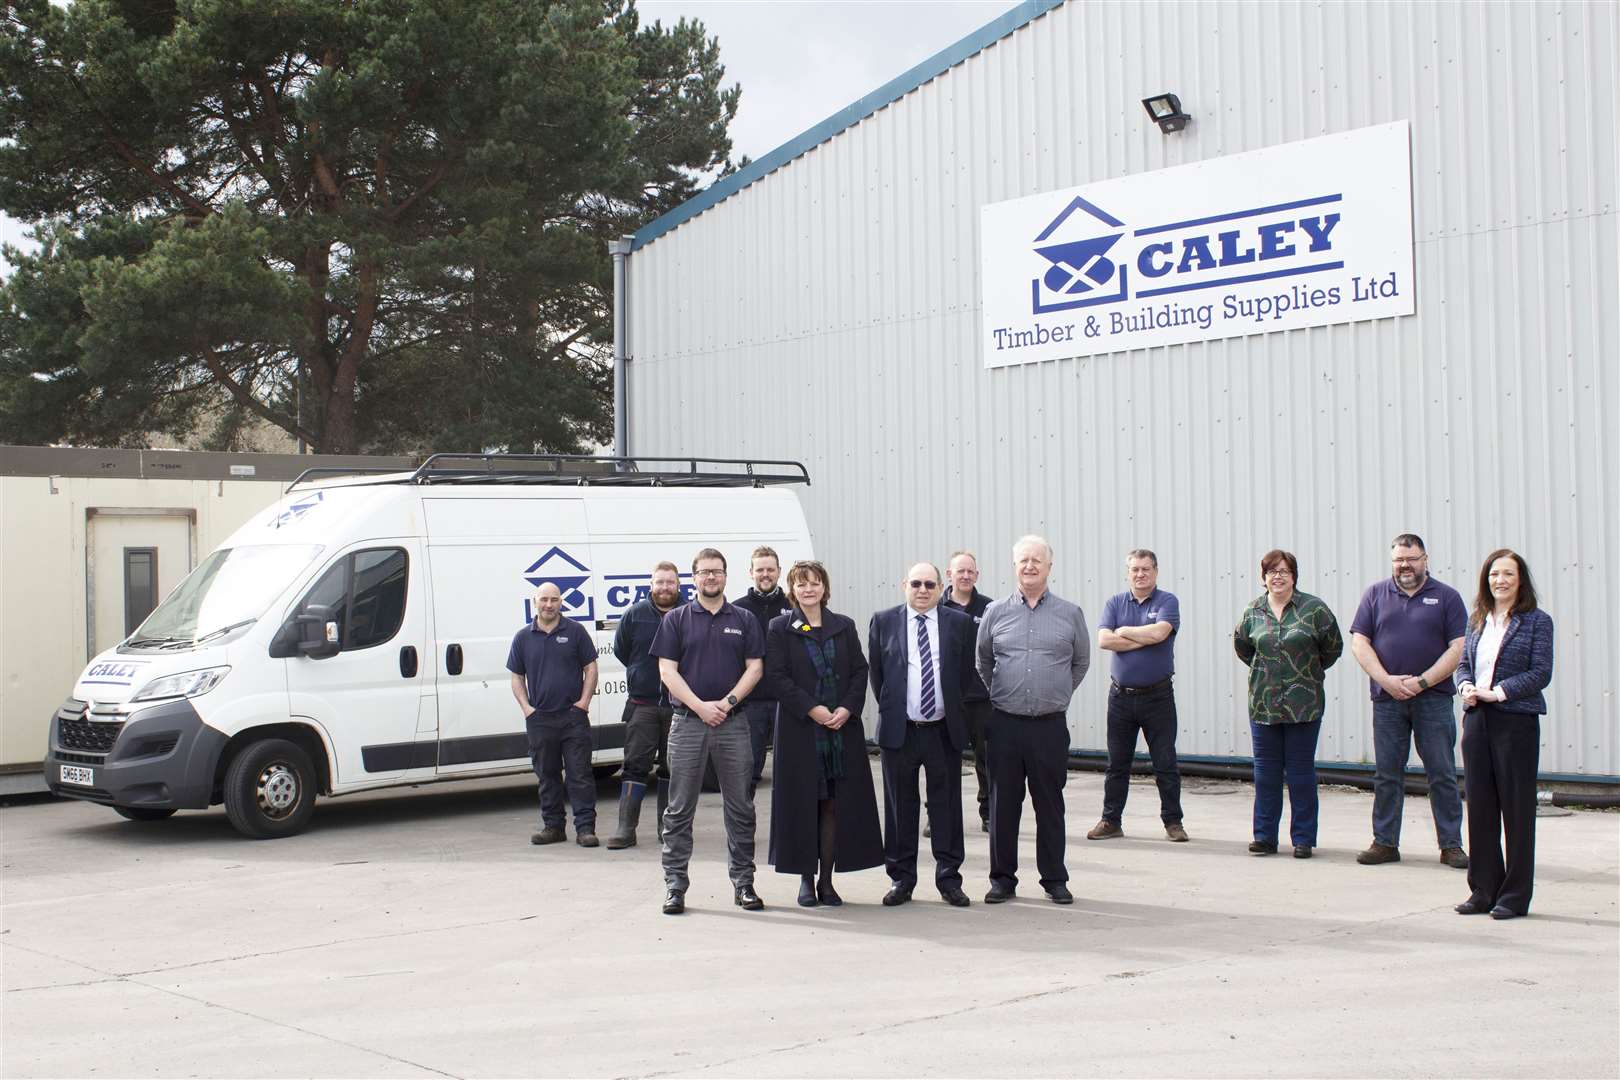 The Caley Timber team.